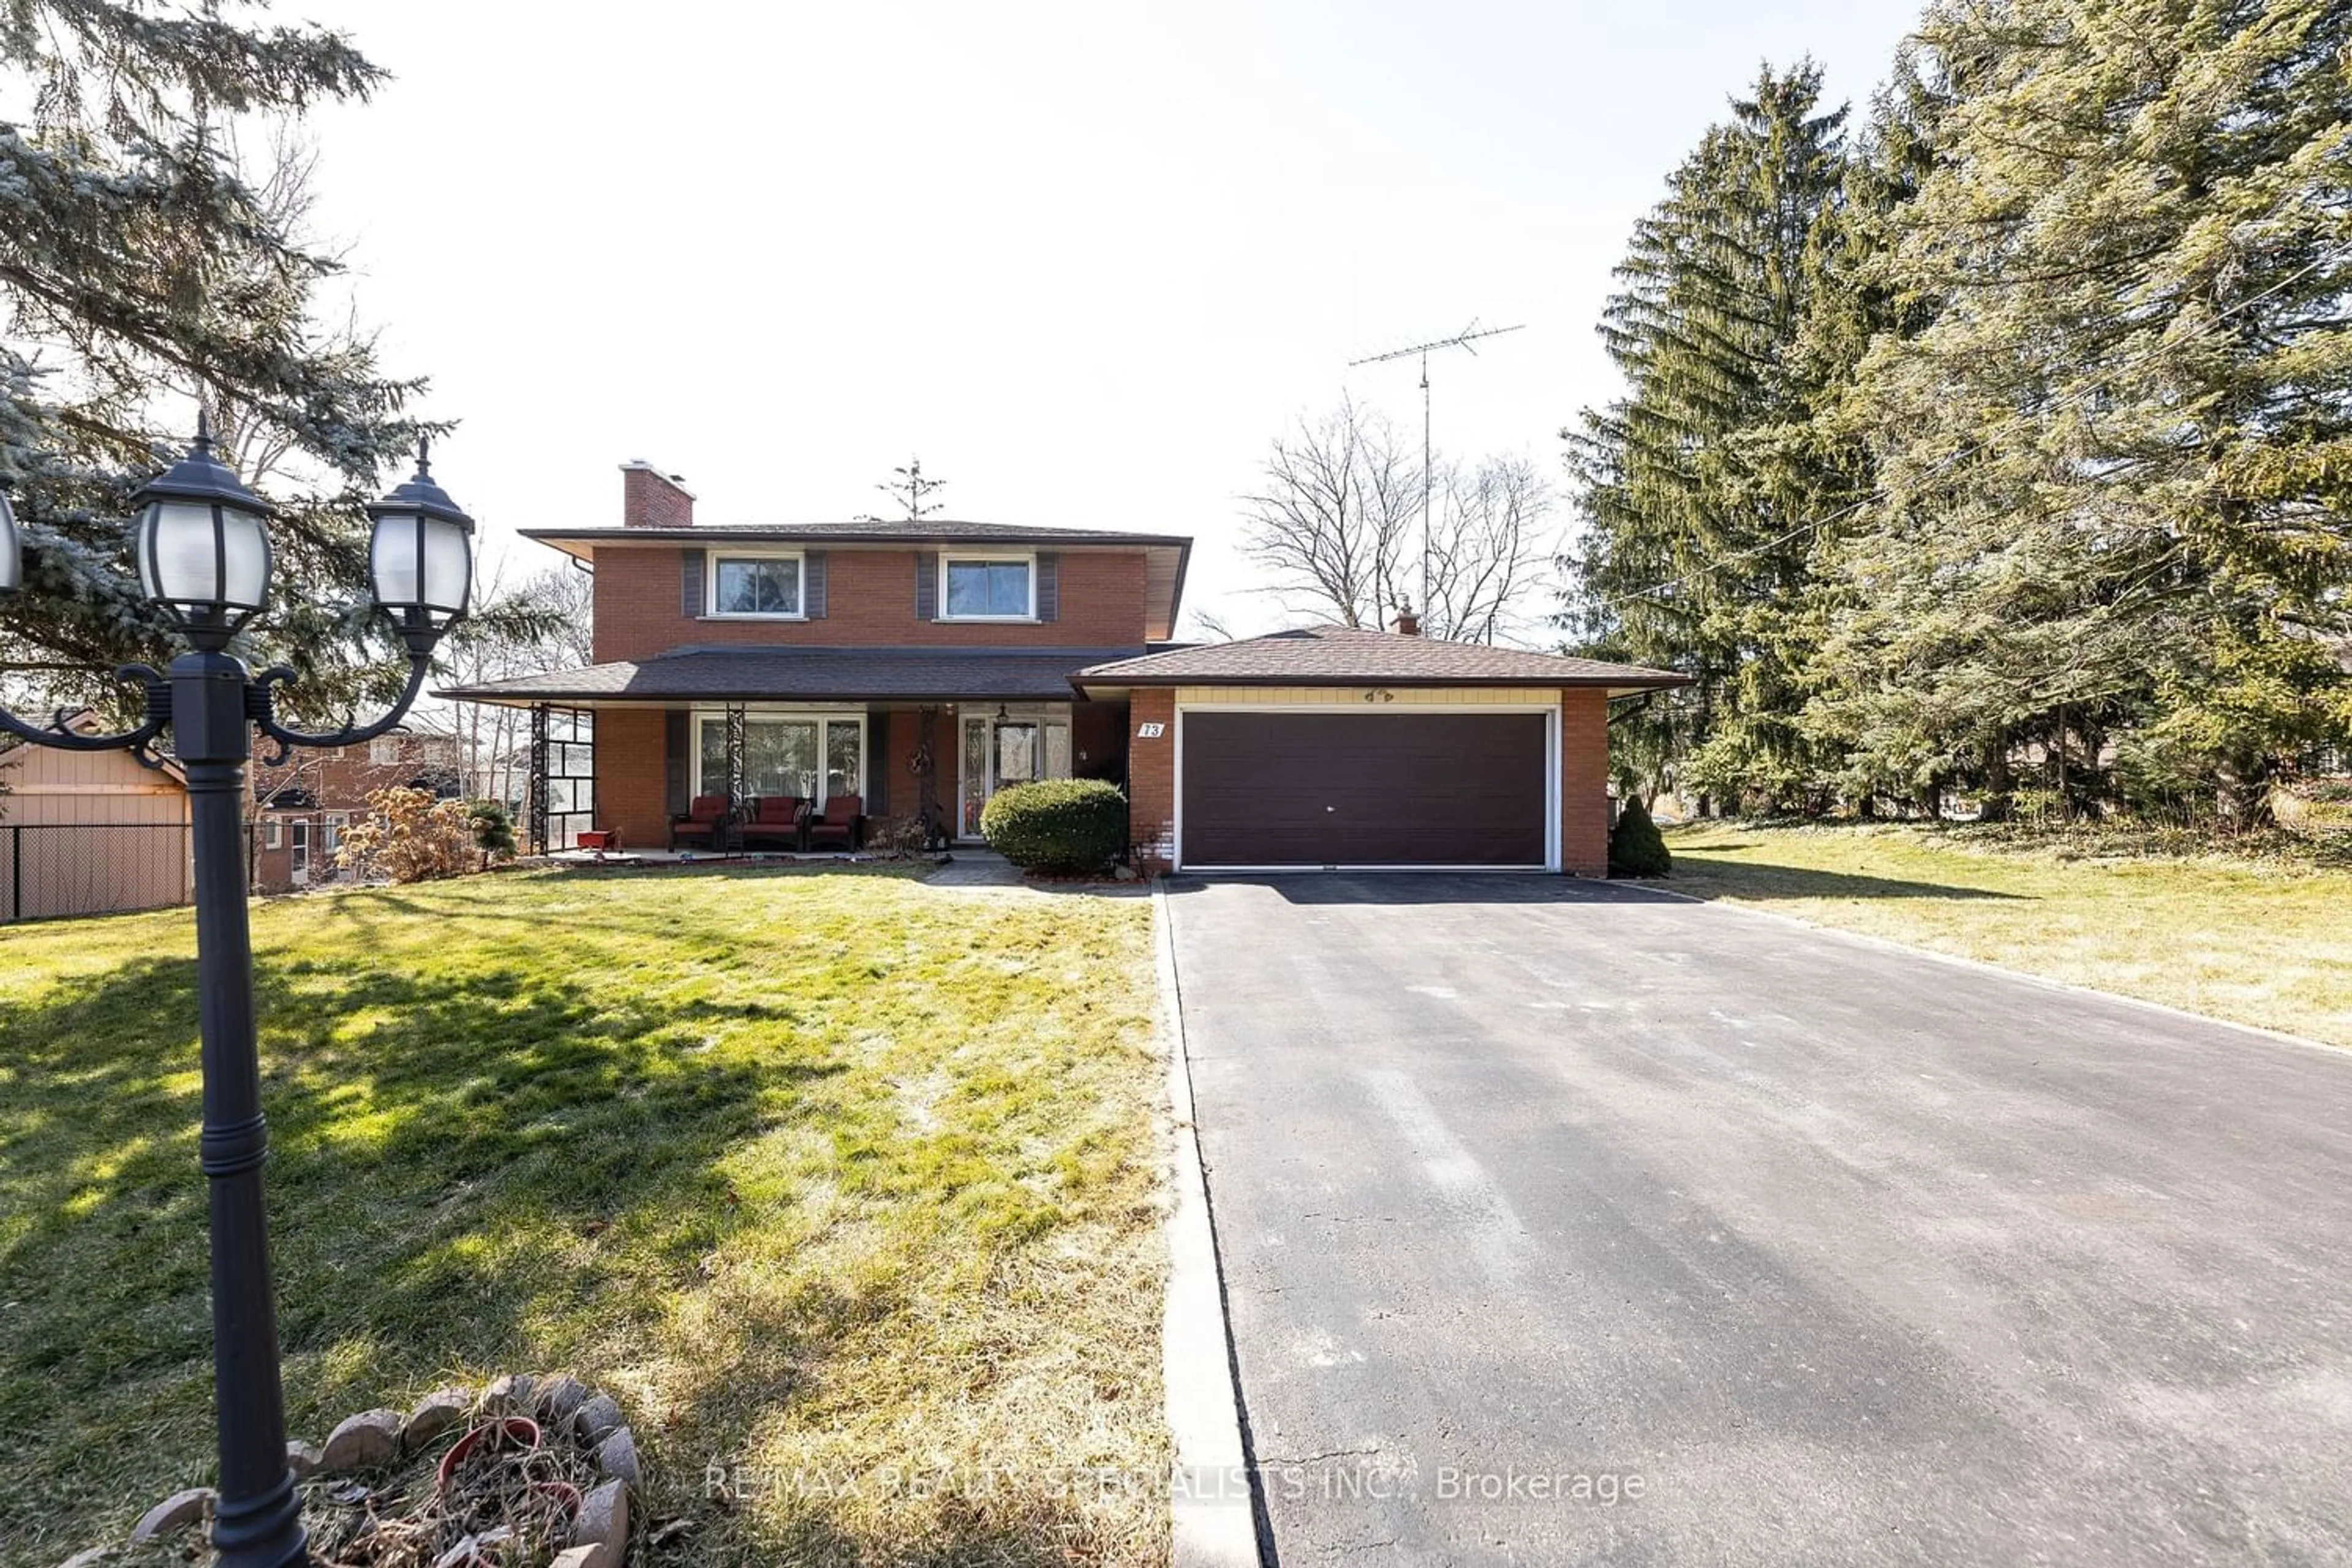 Home with brick exterior material for 73 Thomson Dr, Hamilton Ontario L8B 0G5